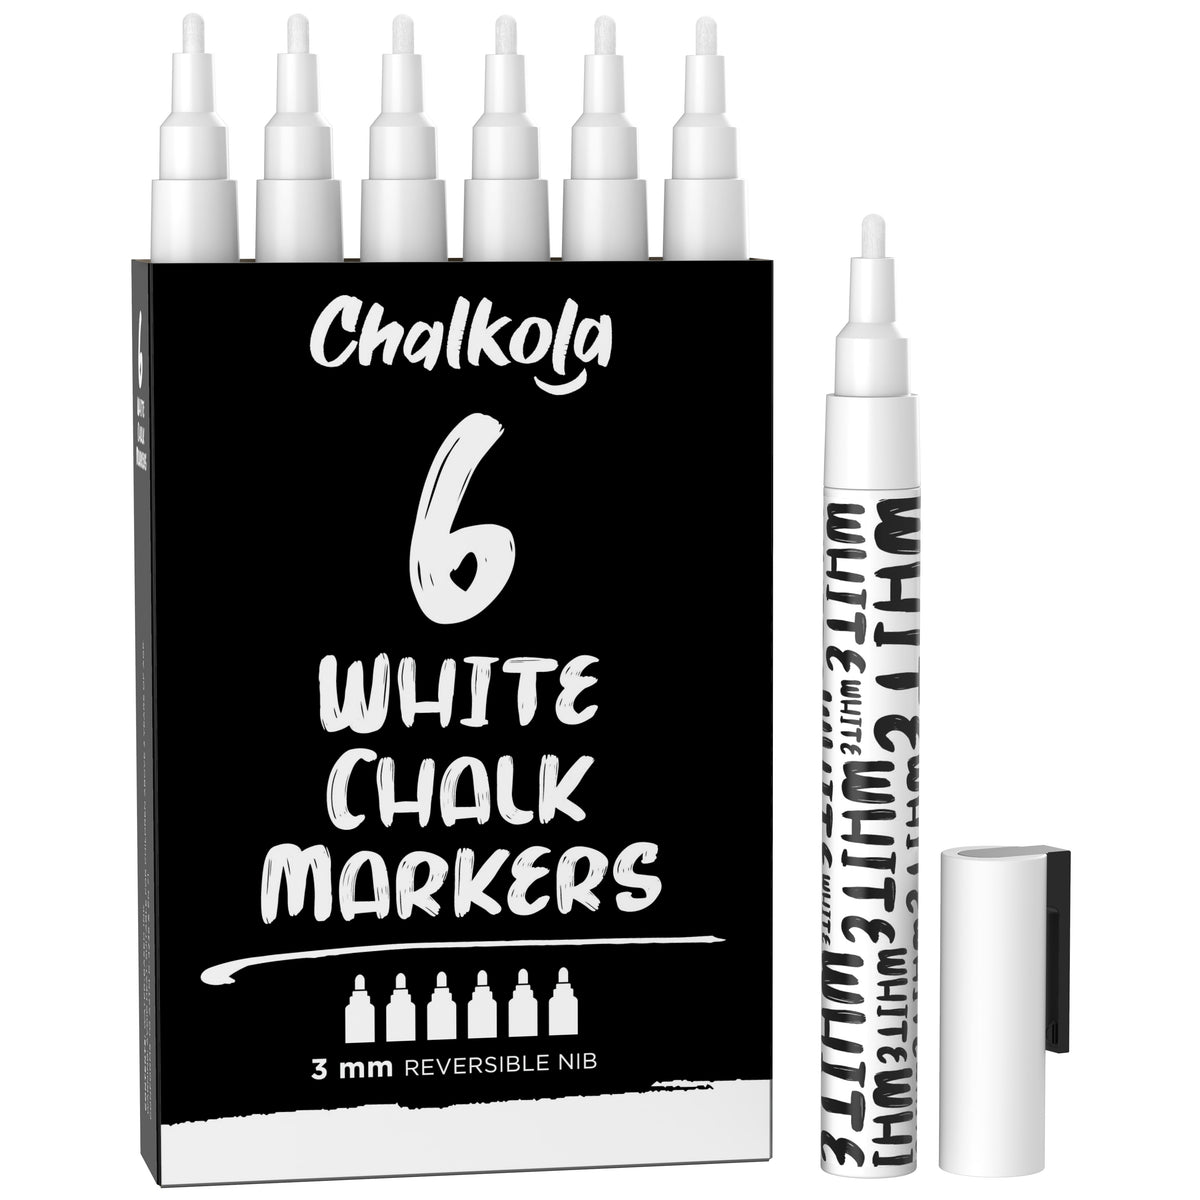 Mr. Pen- White Chalk Markers, 4 Pack, Dual Tip, 8 labels, White Liquid Chalk  Marker - Mr. Pen Store